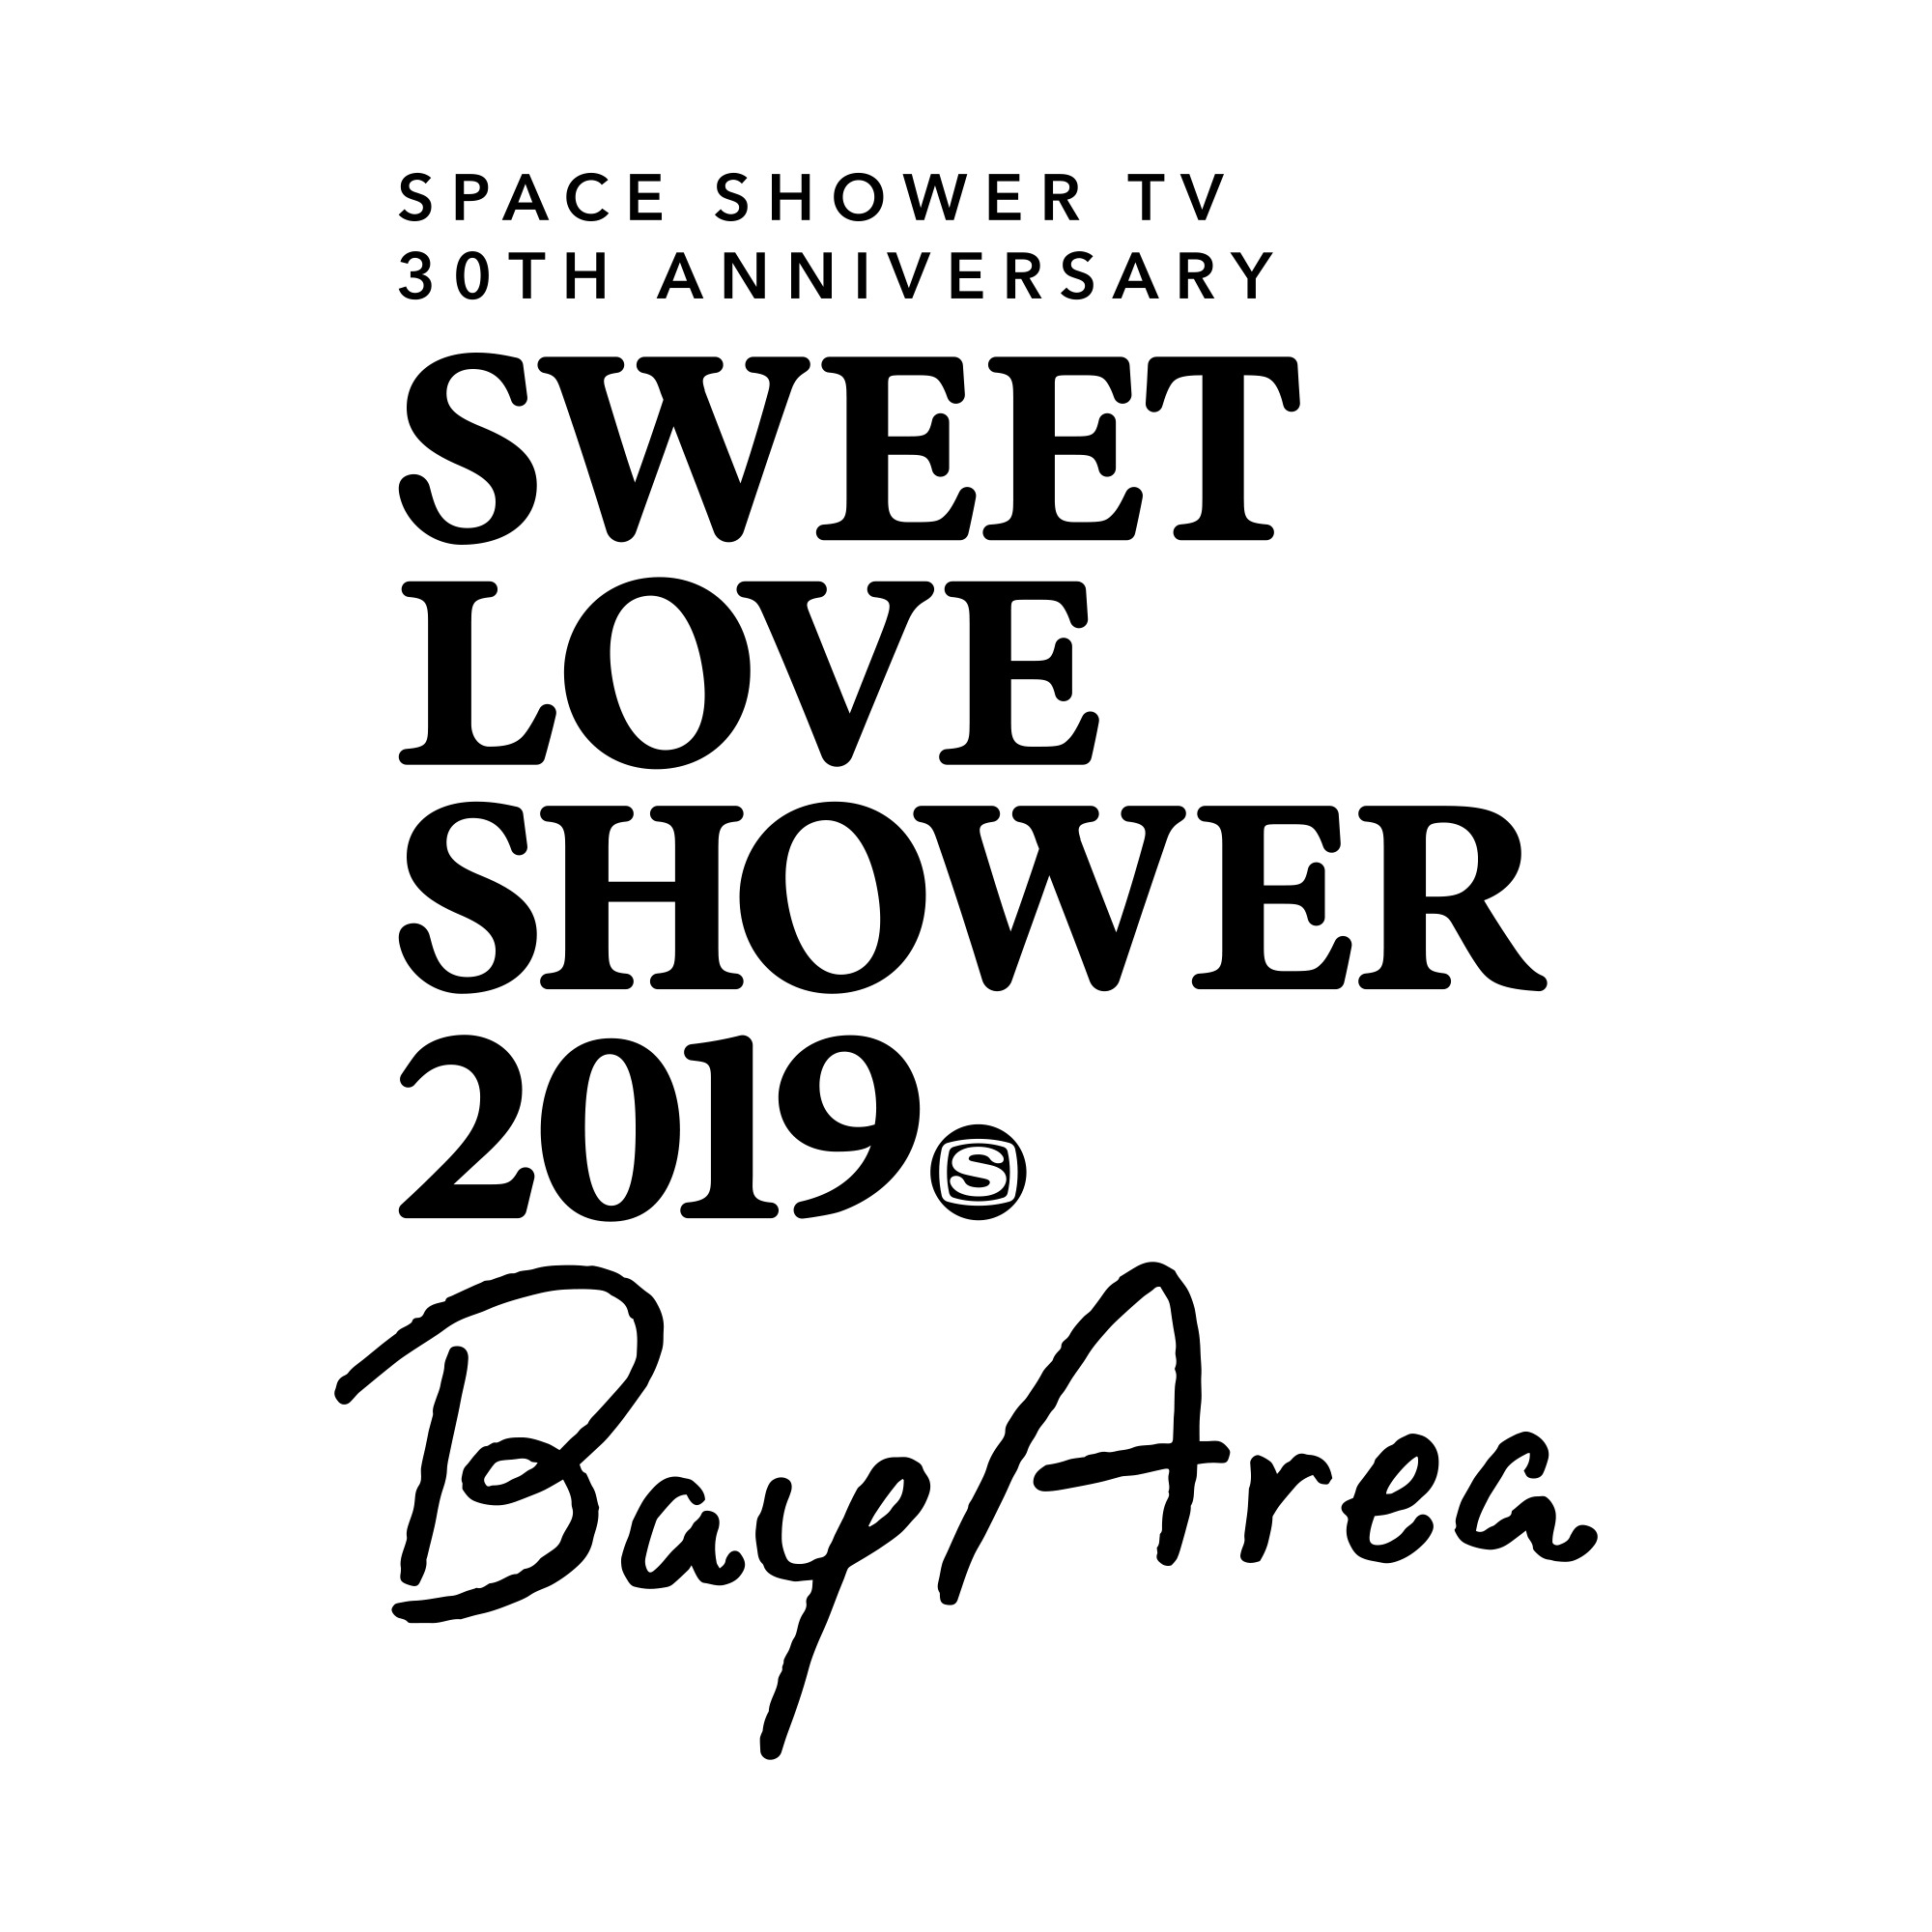 SPACE SHOWER TV 30TH ANNIVERSARY SWEET LOVE SHOWER 2019 ～Bay Area～